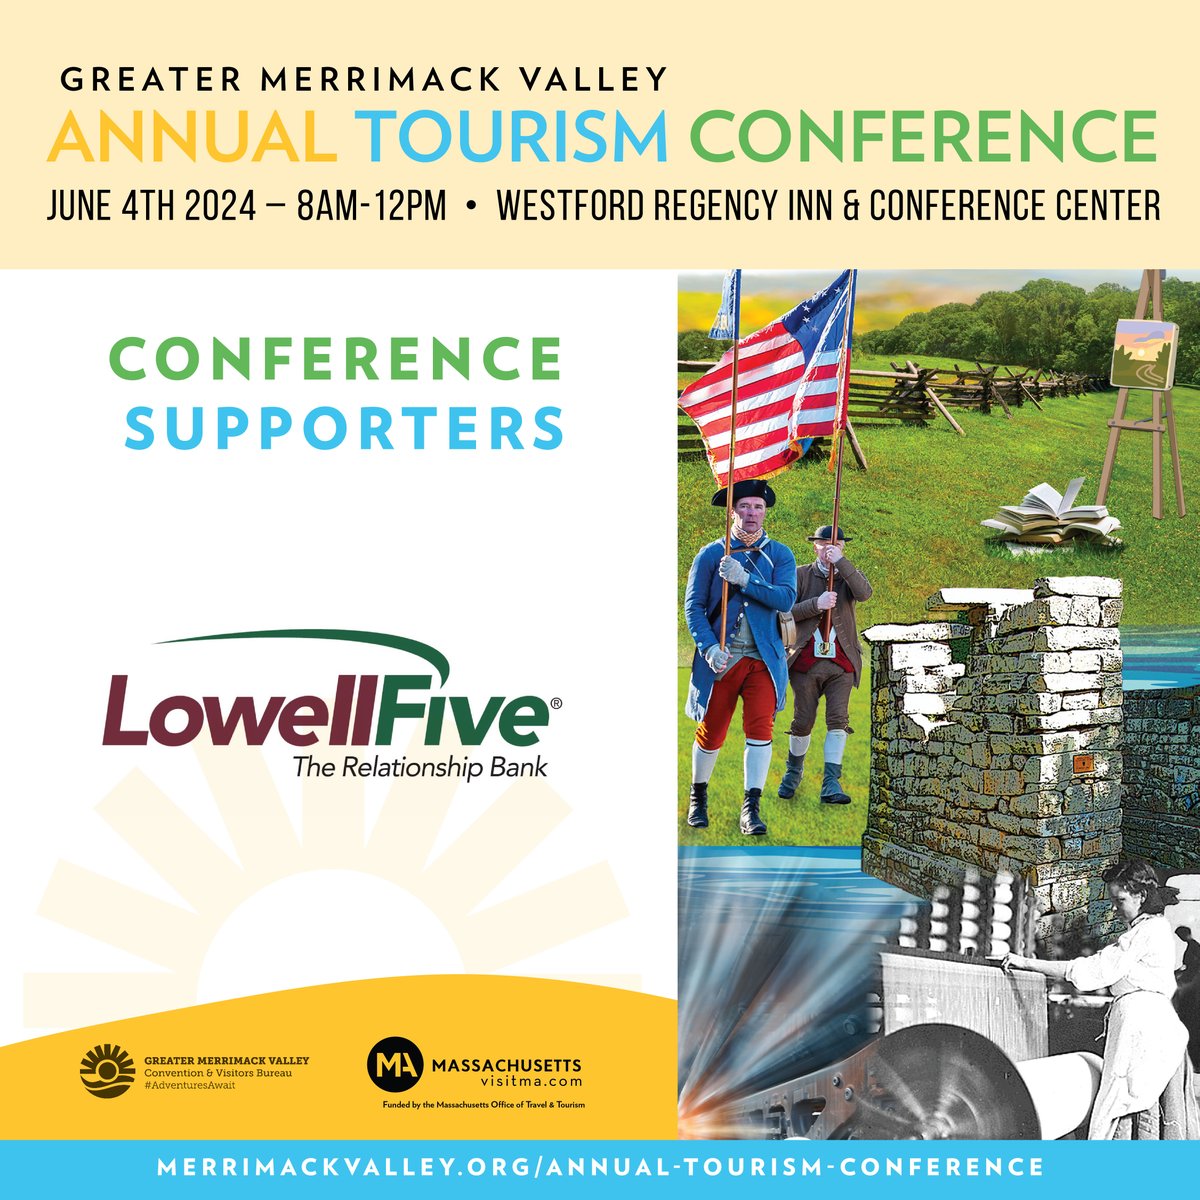 🏦 A heartfelt THANK YOU to #LowellFiveBank for sponsoring the 2024 Annual Tourism Conference! 🌟 Join us on Tuesday, June 4th from 8AM – 12PM at the Westford Regency Inn & Conference Center. Let's explore the future of tourism together! #MerrimackValley #LocalSupport